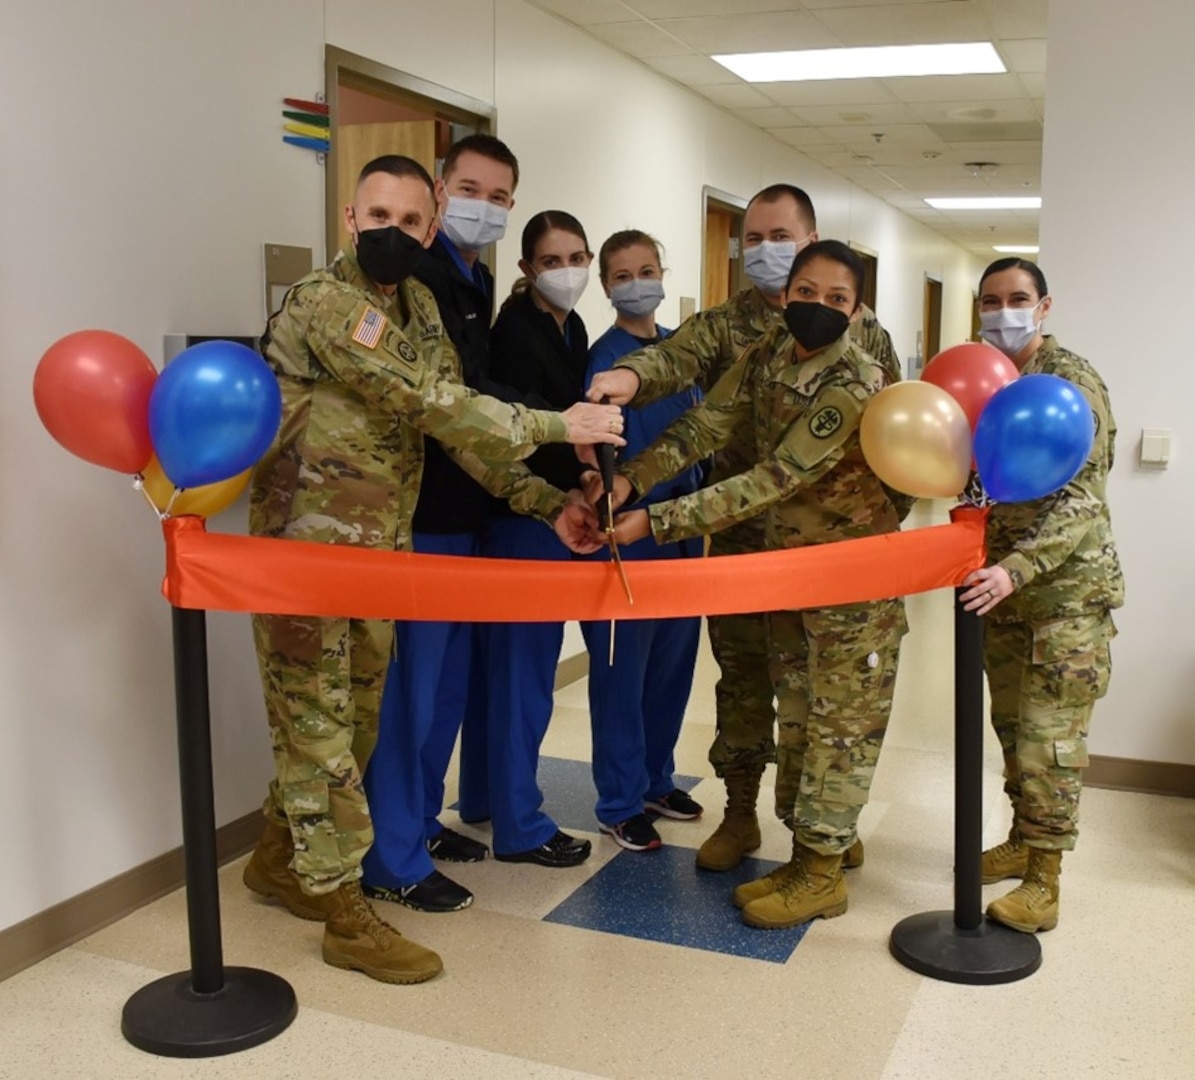 Doctors and nurses are behind a large ribbon with balloons as decoration. They hold large scissors and stand ready to cut the ribbon.